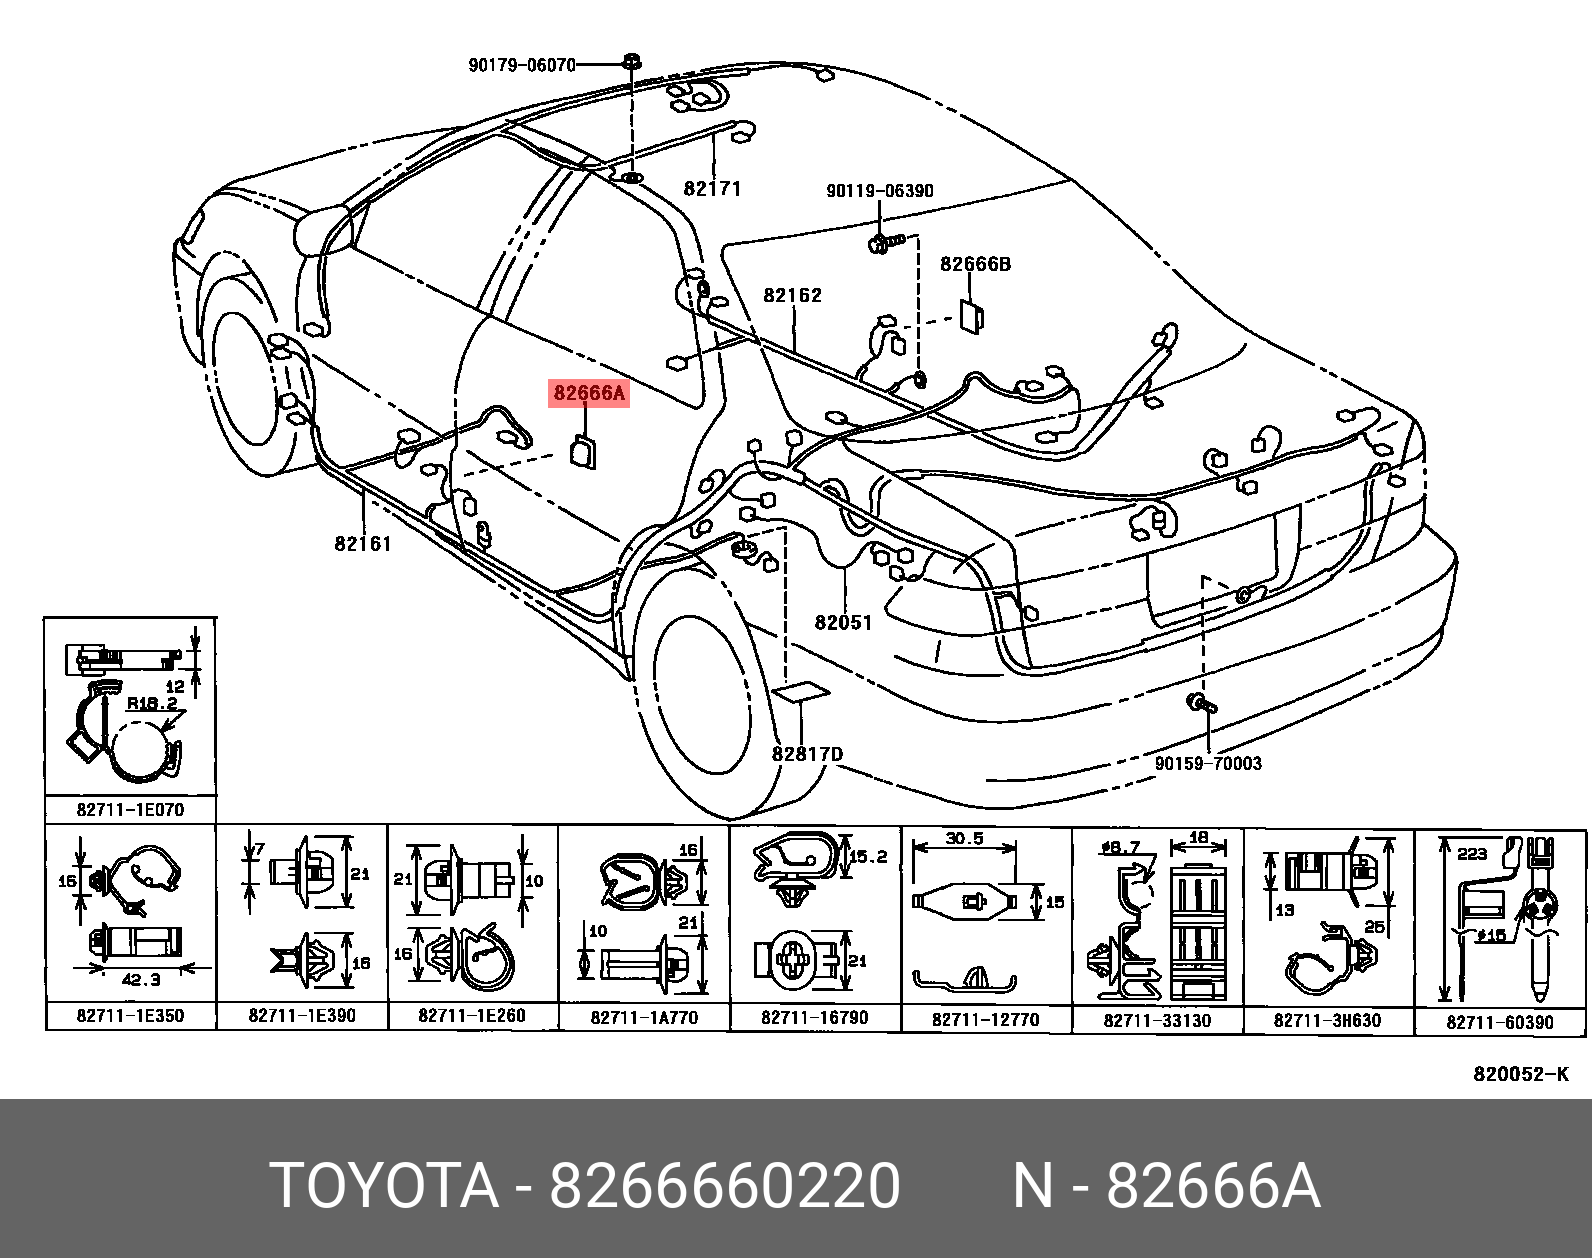 CAMRY 200601 - 201108, HOLDER, CONNECTOR NO.7